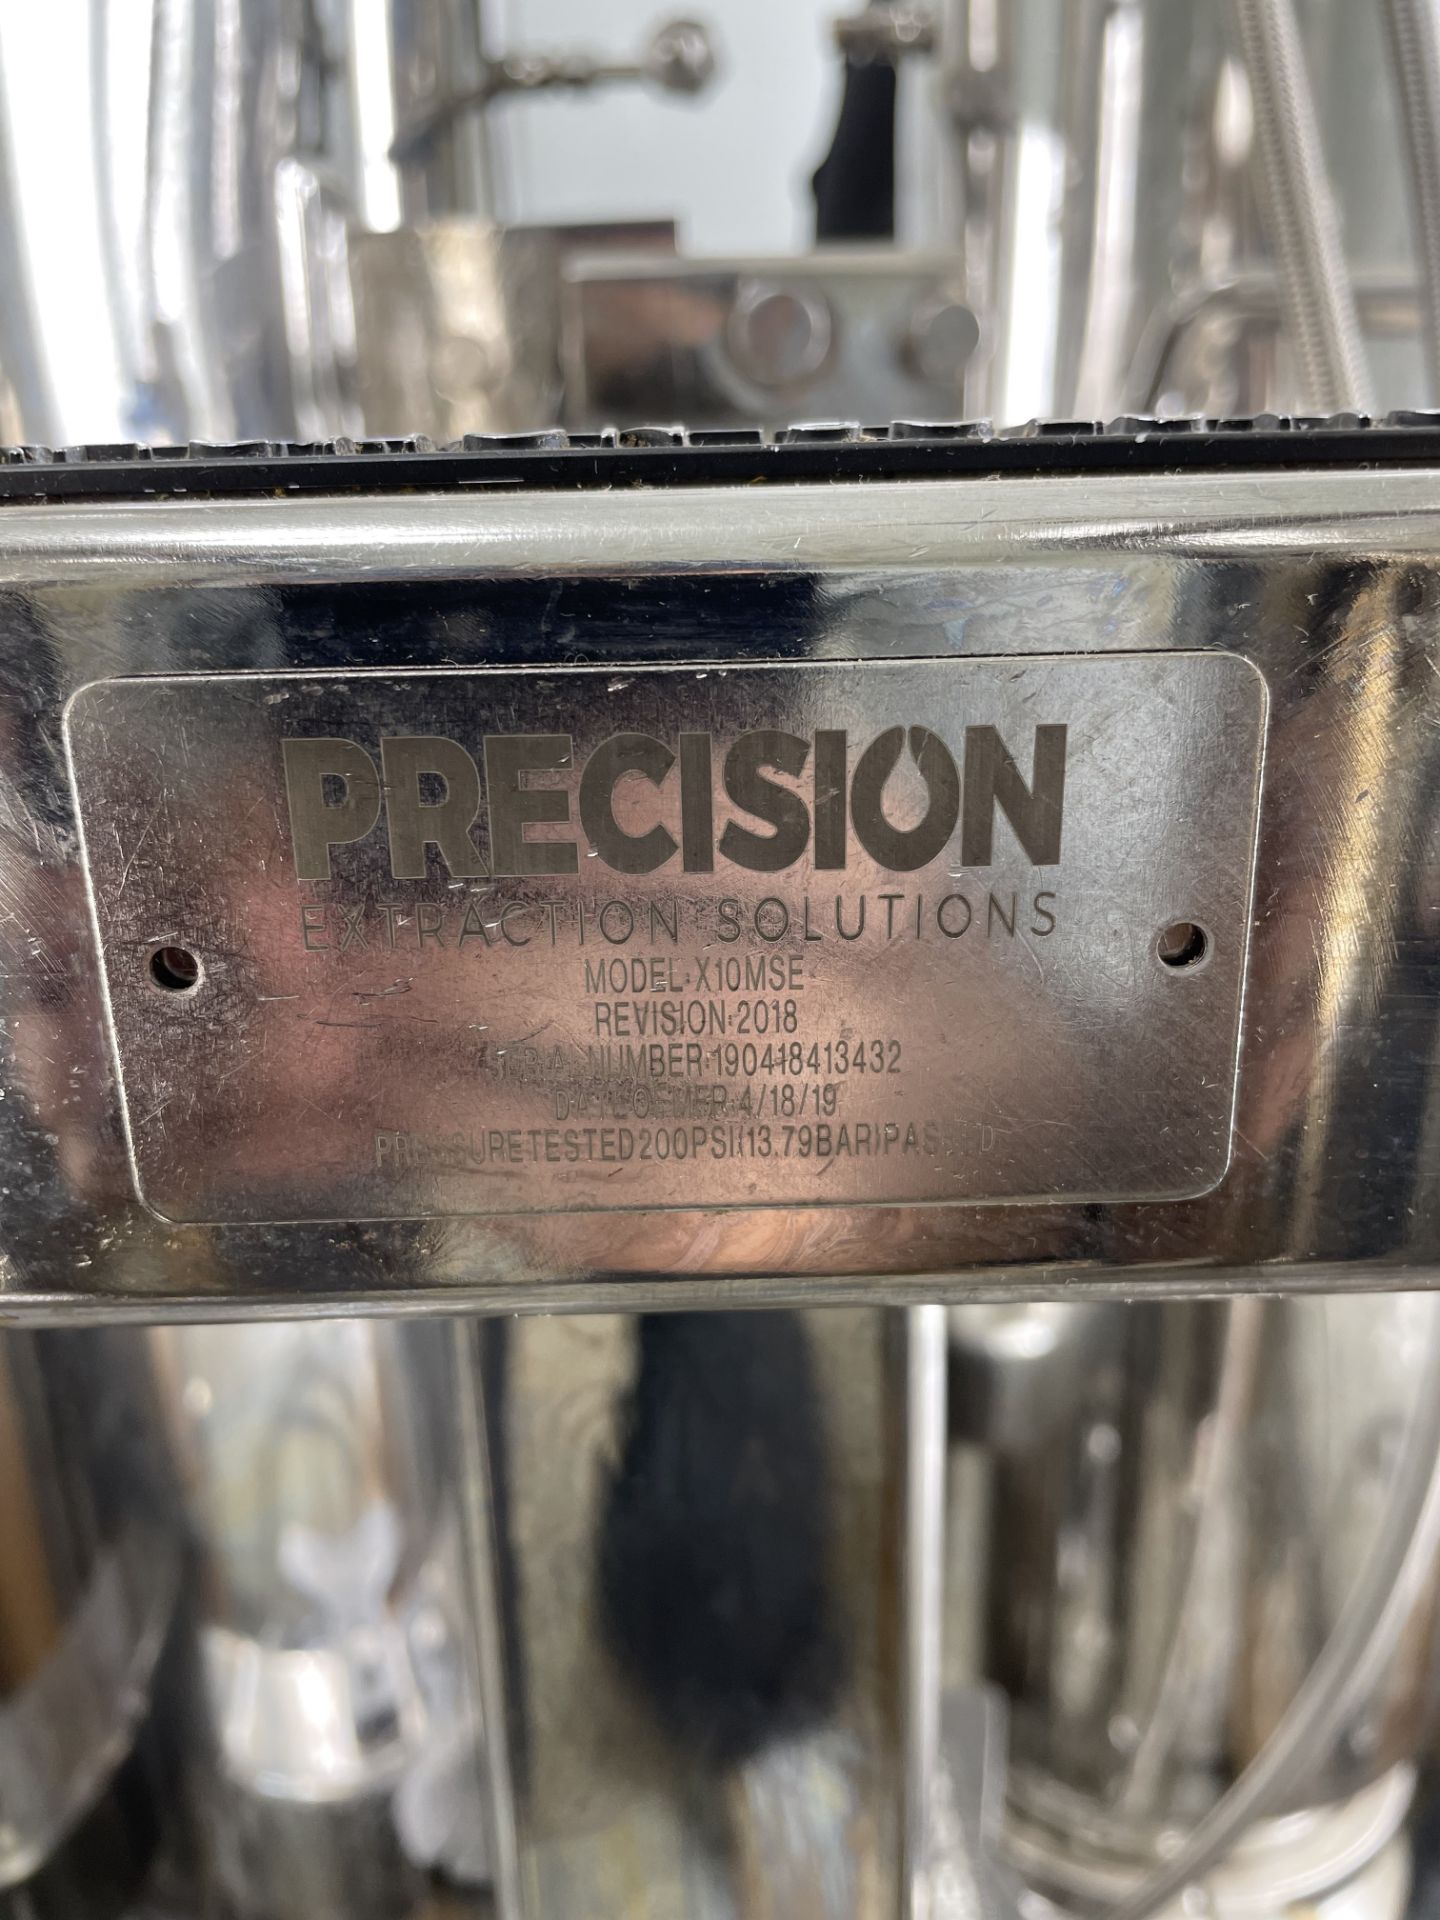 Used Precision Stainless Butane, Propane & Isobutane Extractor X10 Series. Model X10MSE - Image 8 of 45